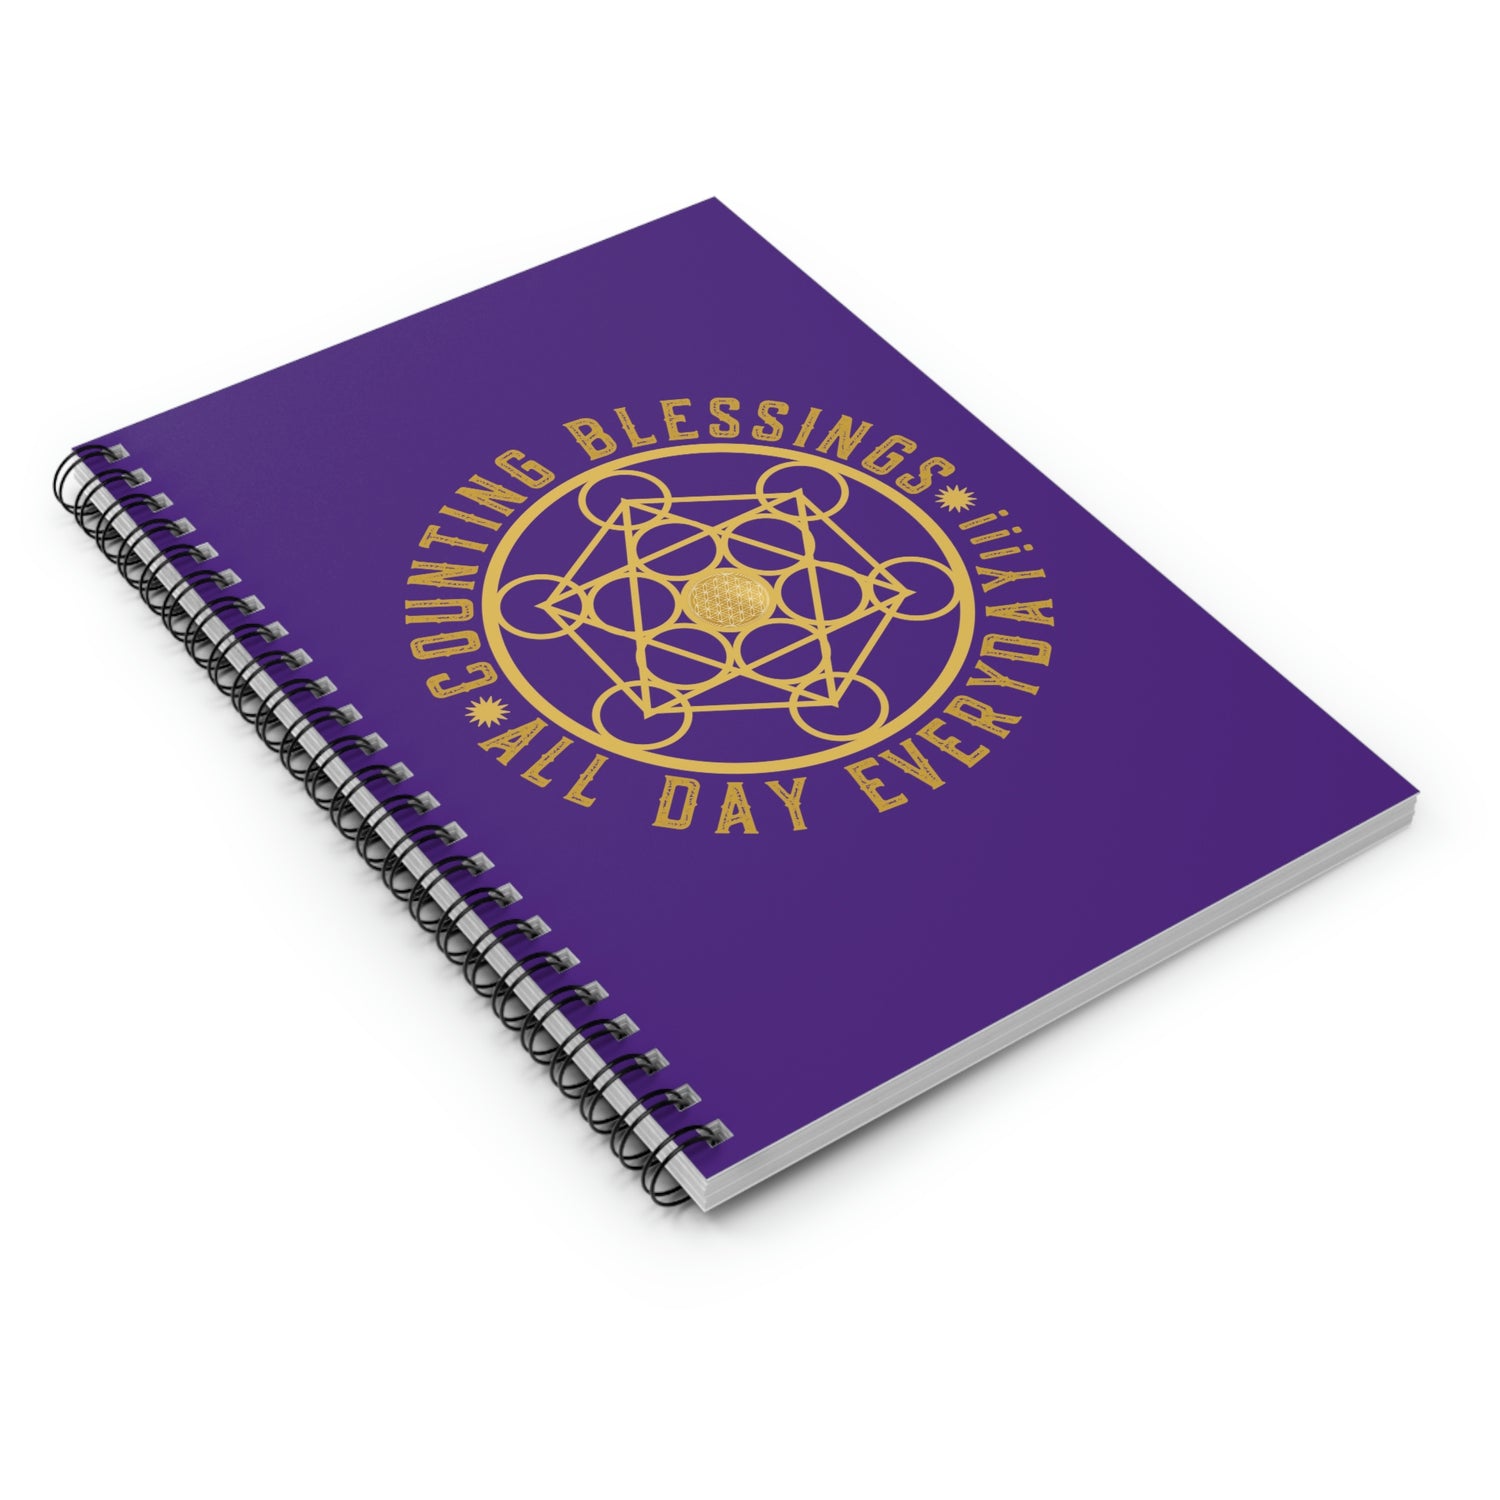 COUNTING BLESSINGS ALL DAY EVERYDAY!!! - Spiral Notebook - Ruled Line - Purple